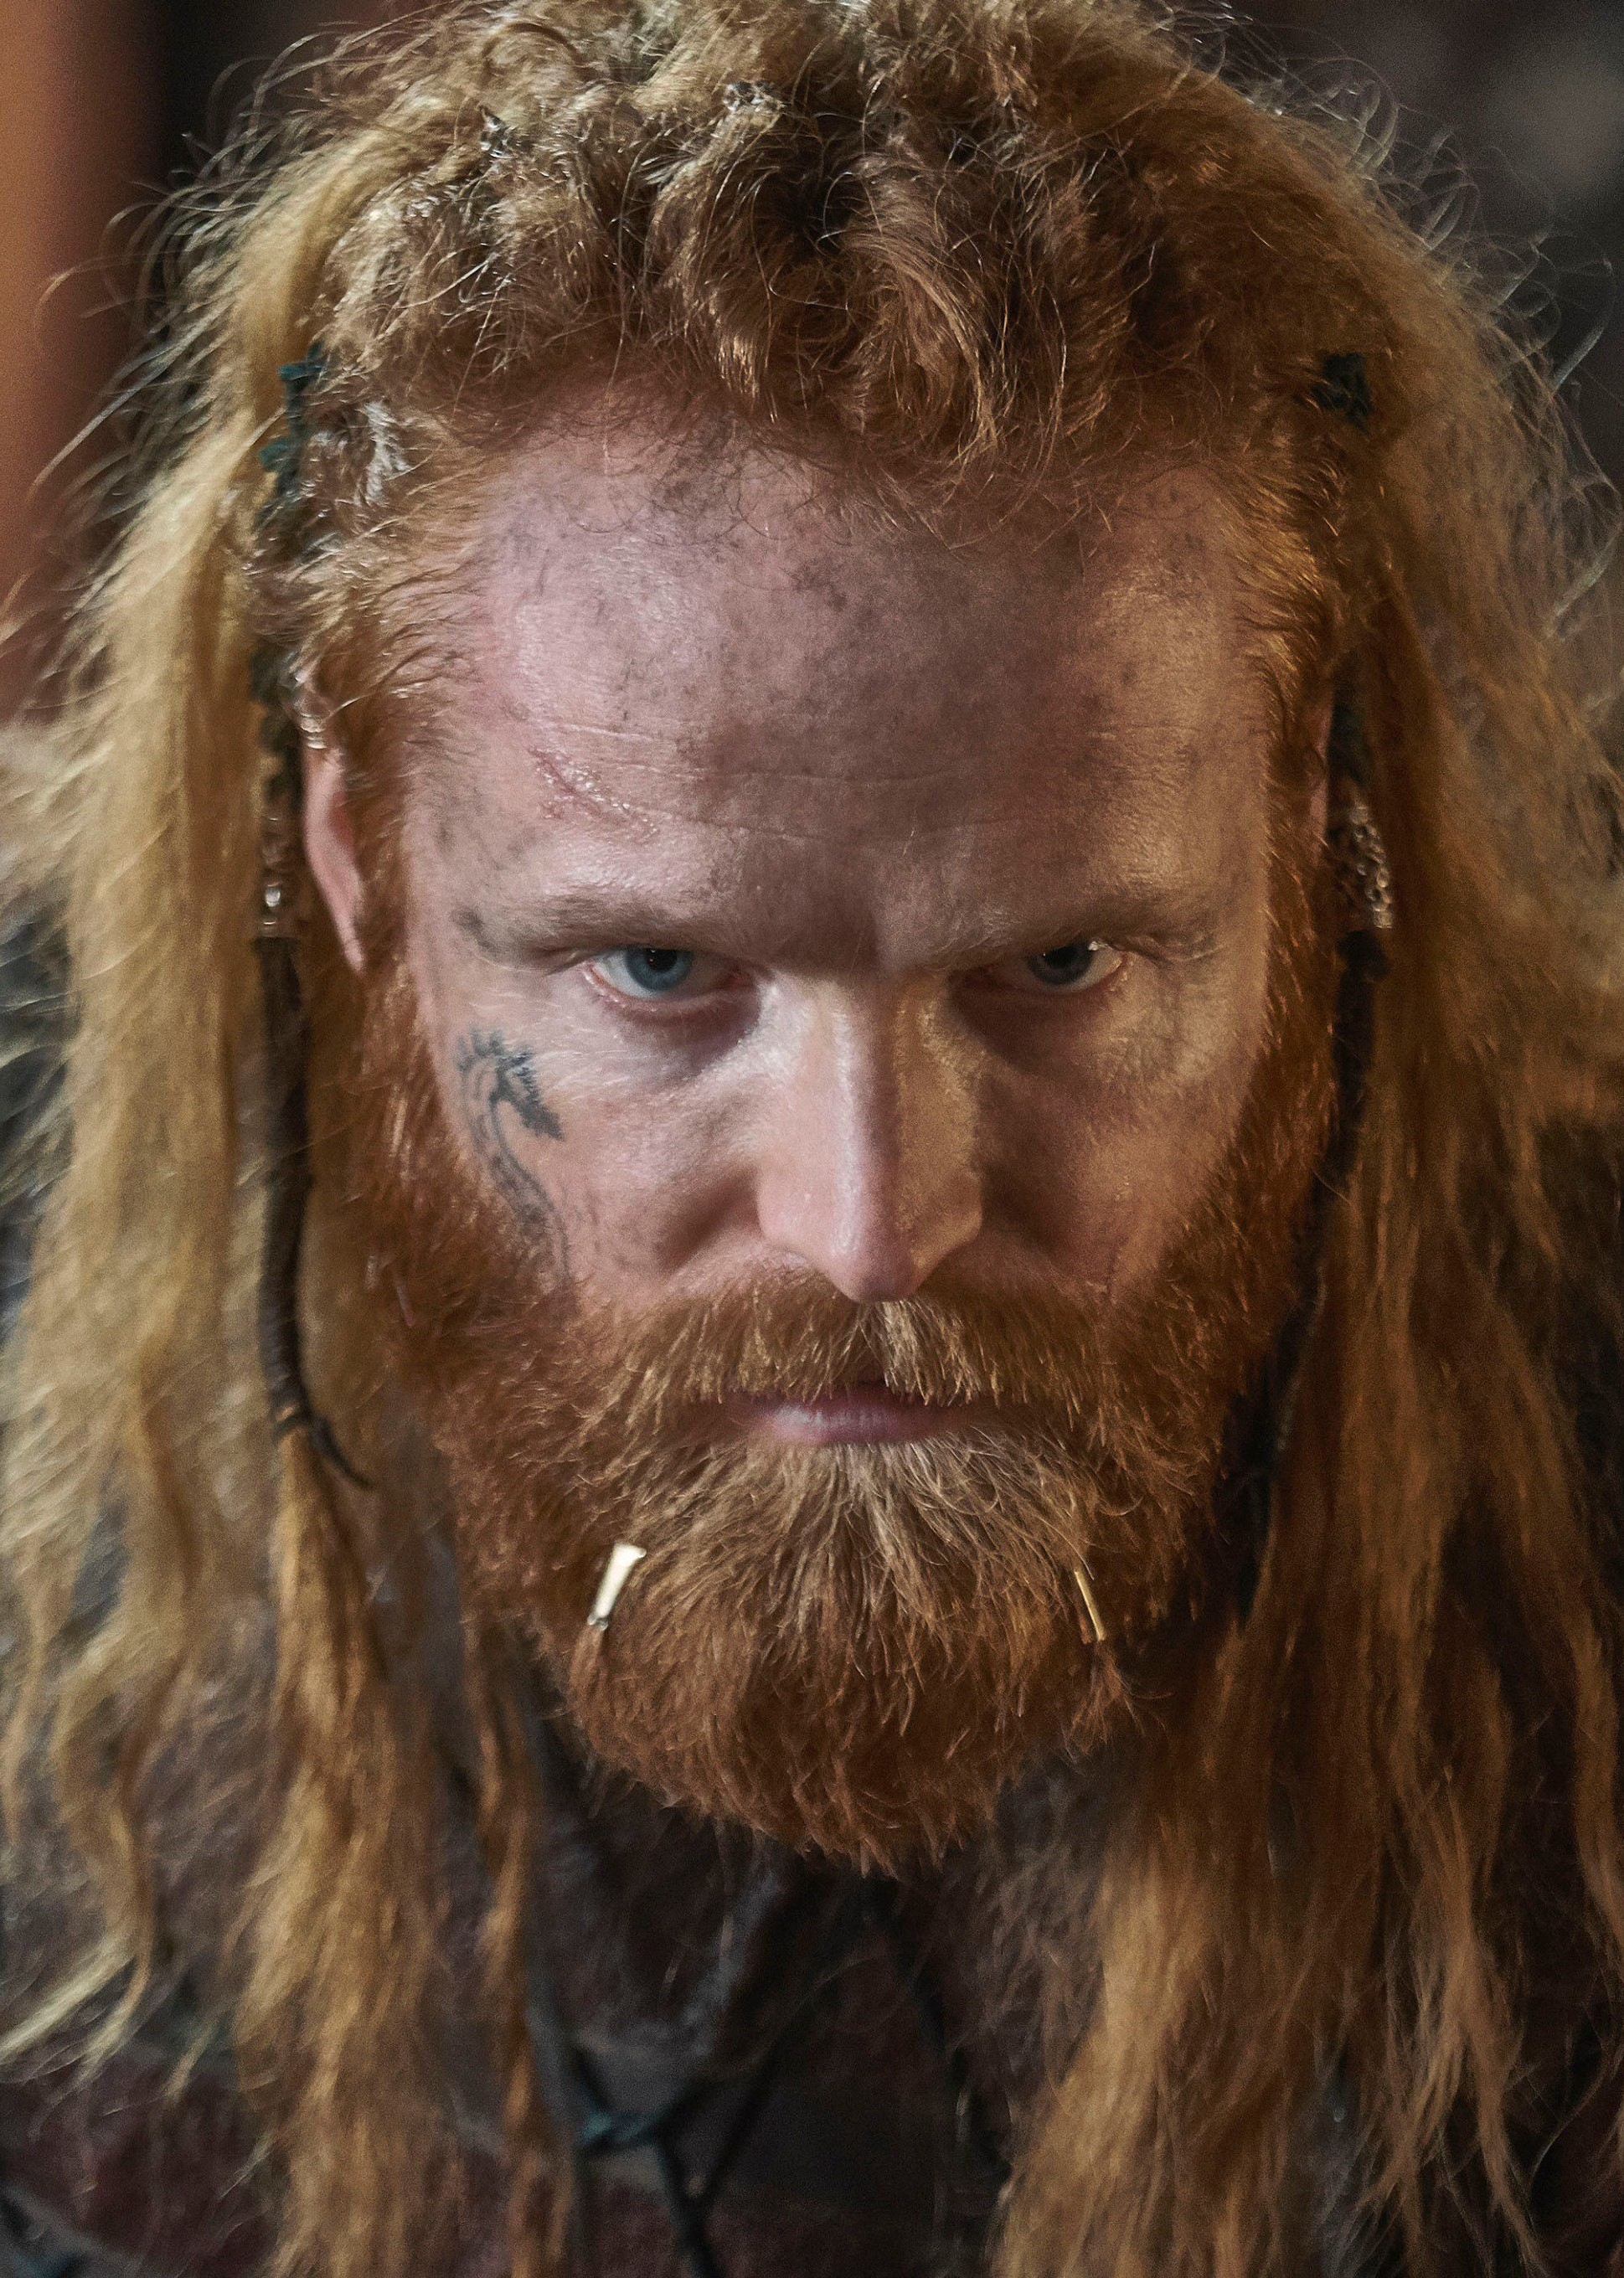 Vikings season 6: Who is Cnut the Great? Will Canute become King